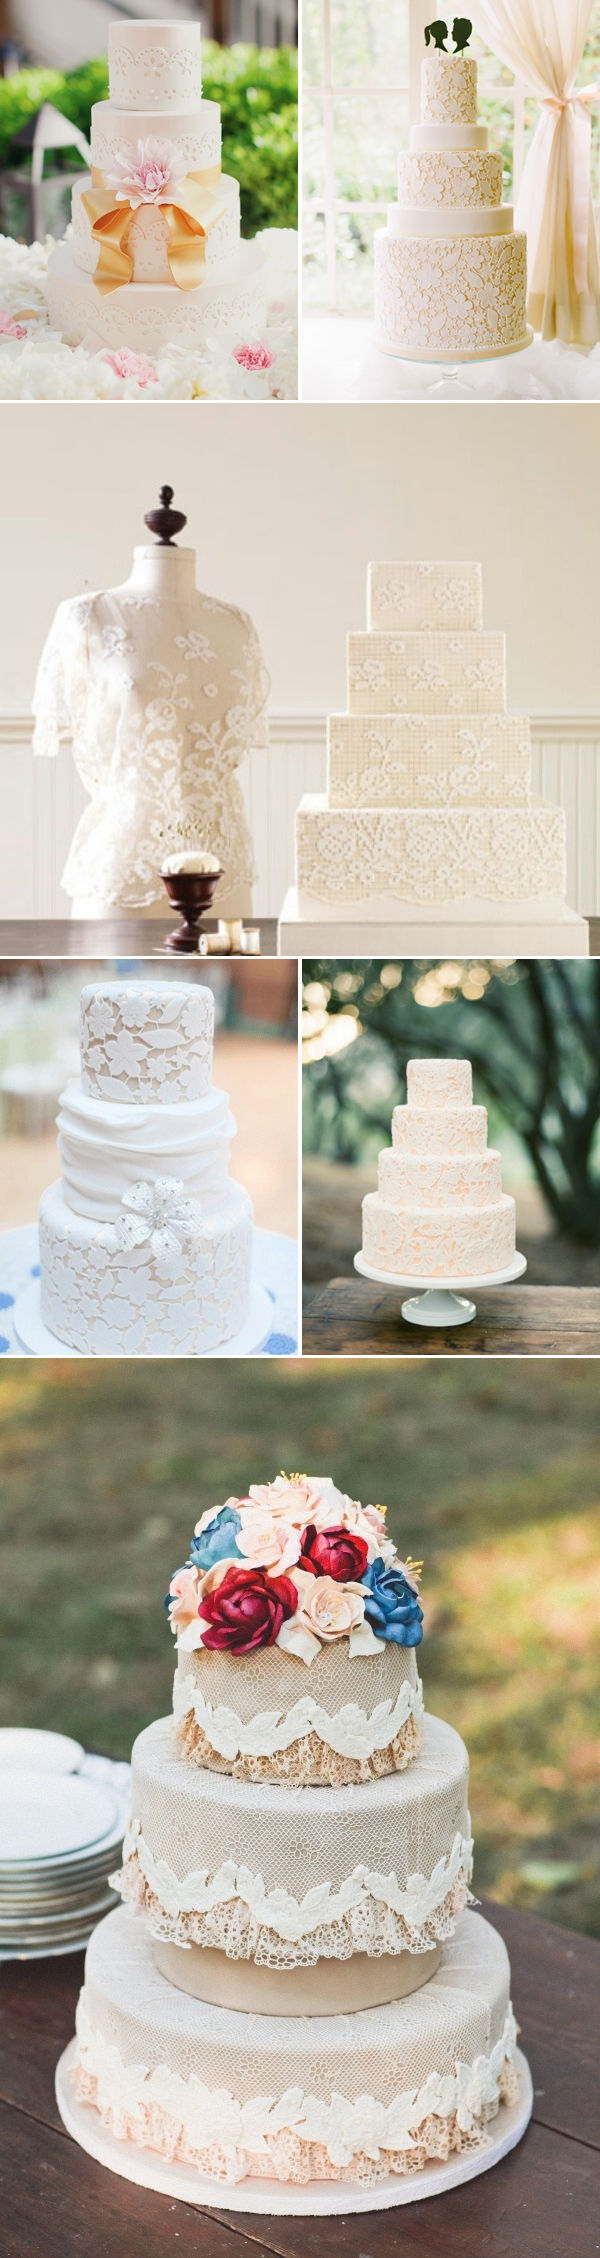 Rustic Lace Wedding Cakes Pictures